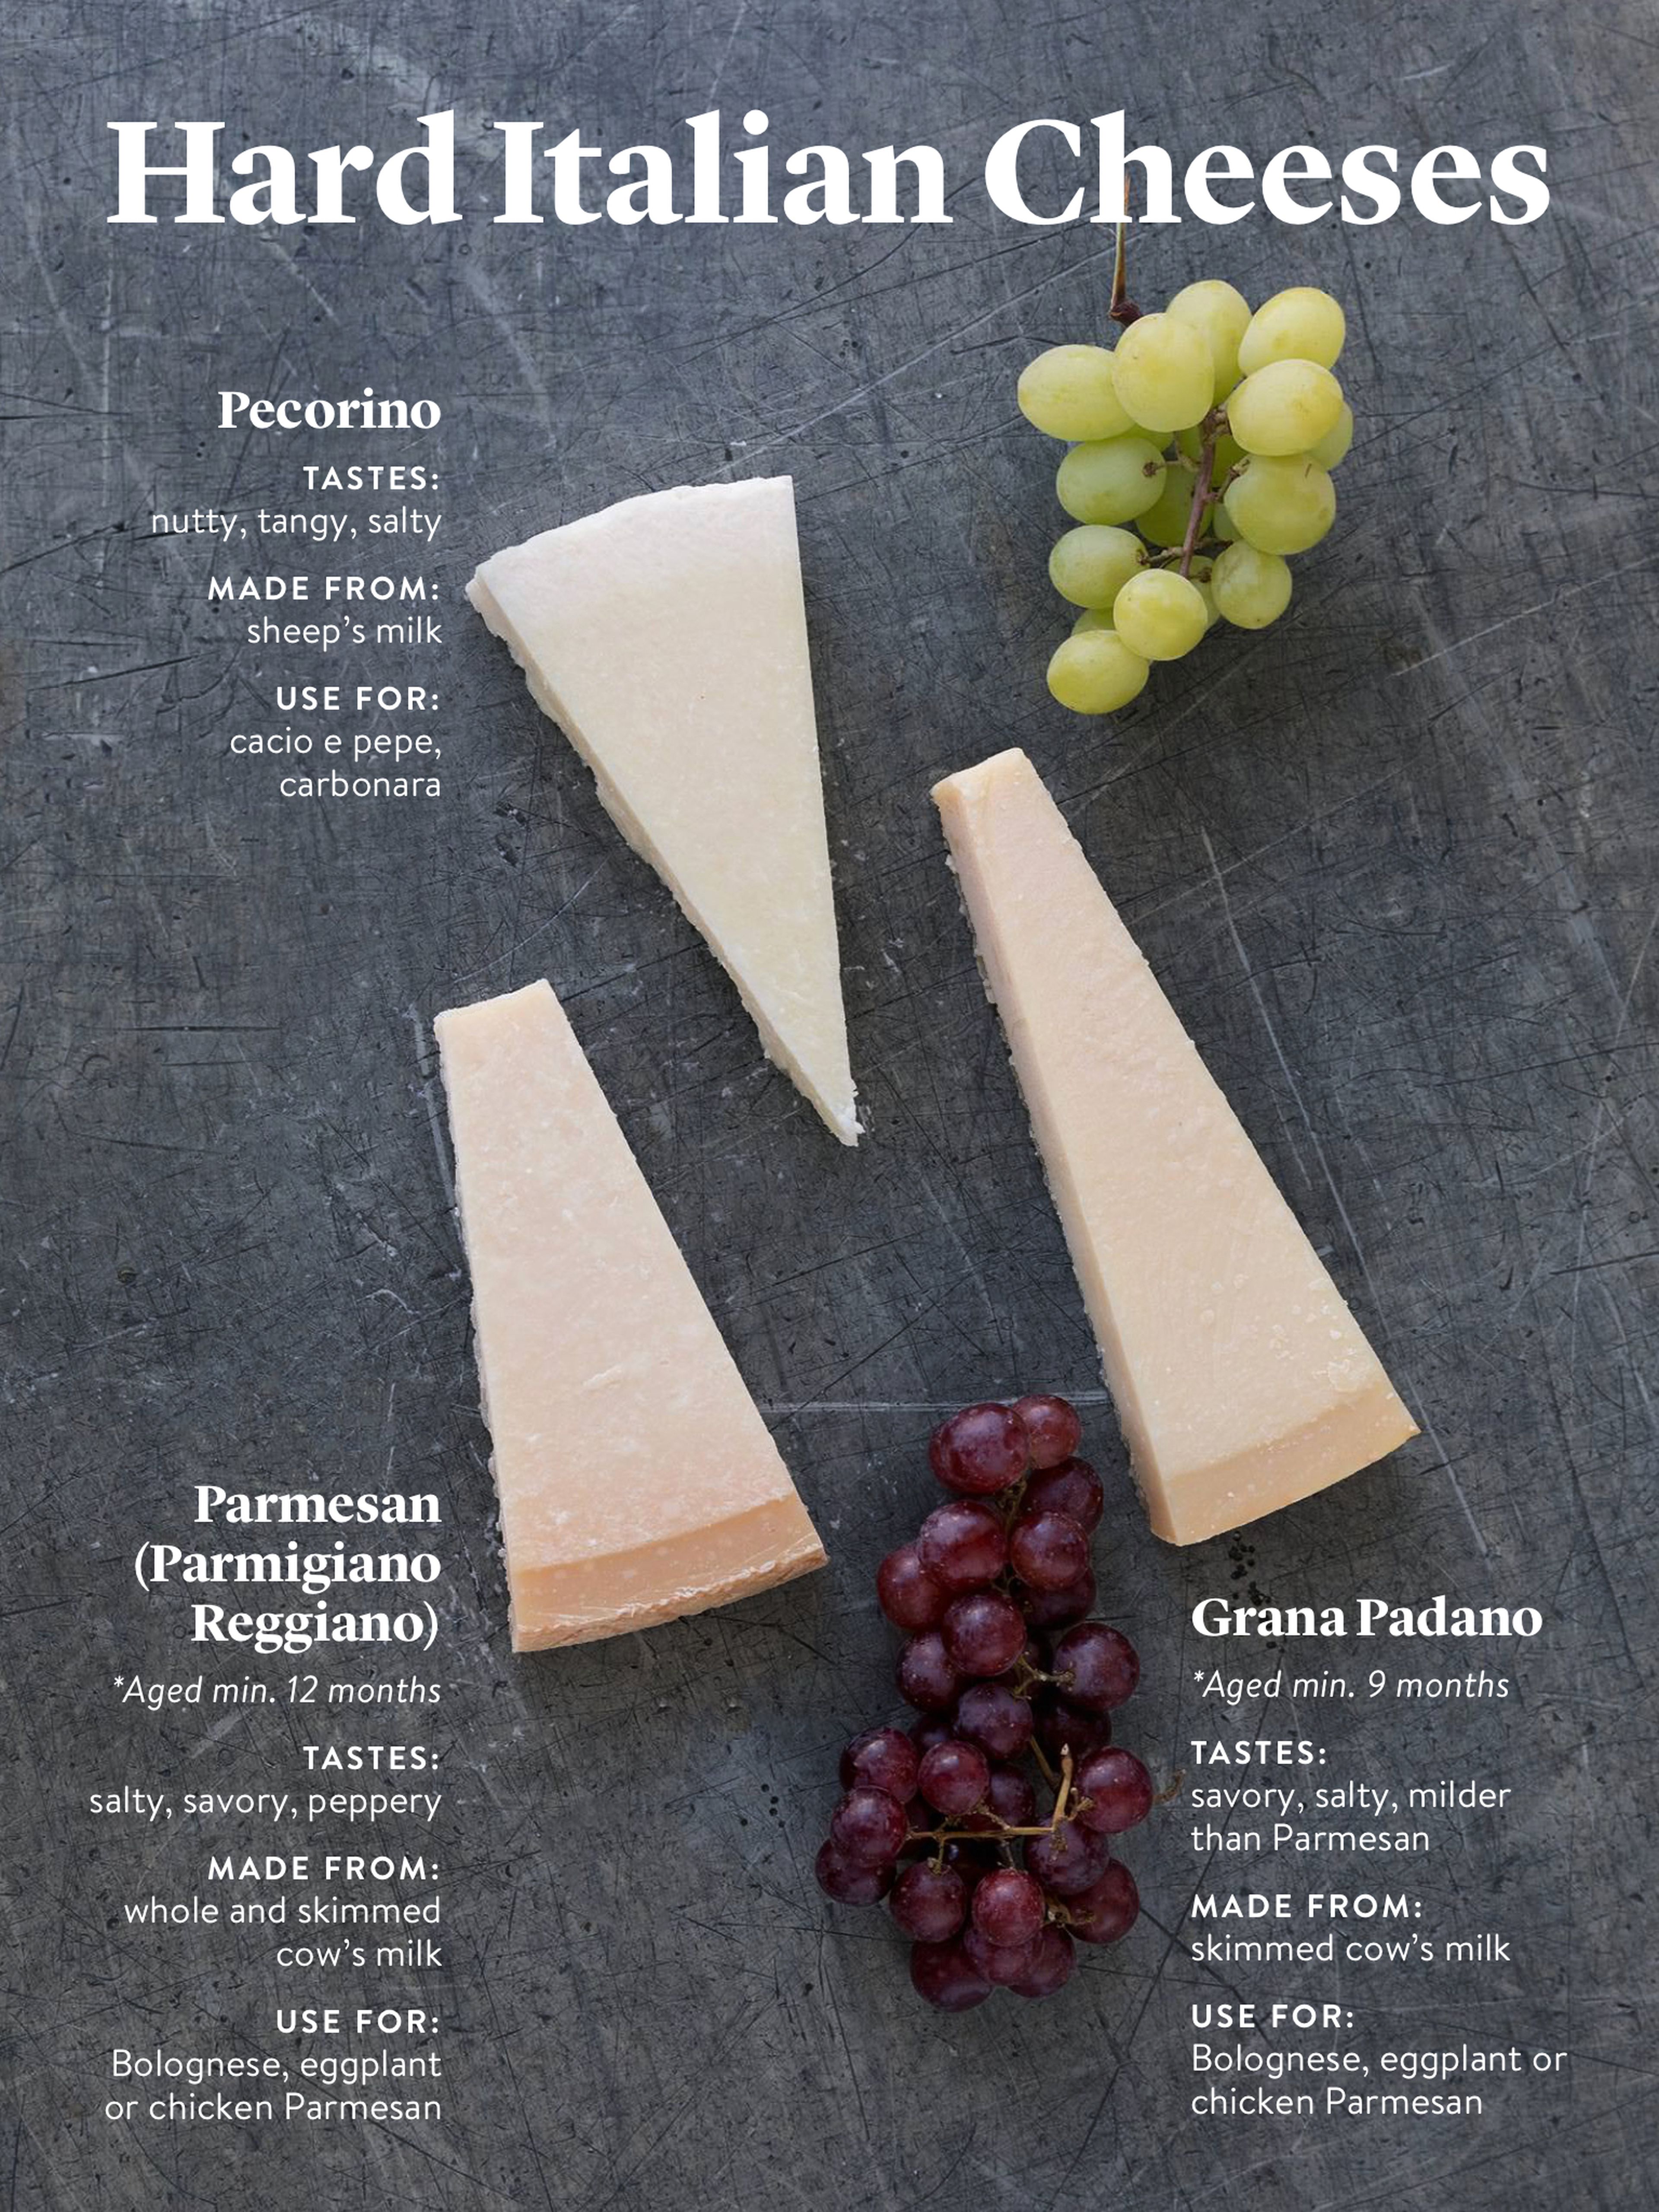 The Many Different Types of Cheese